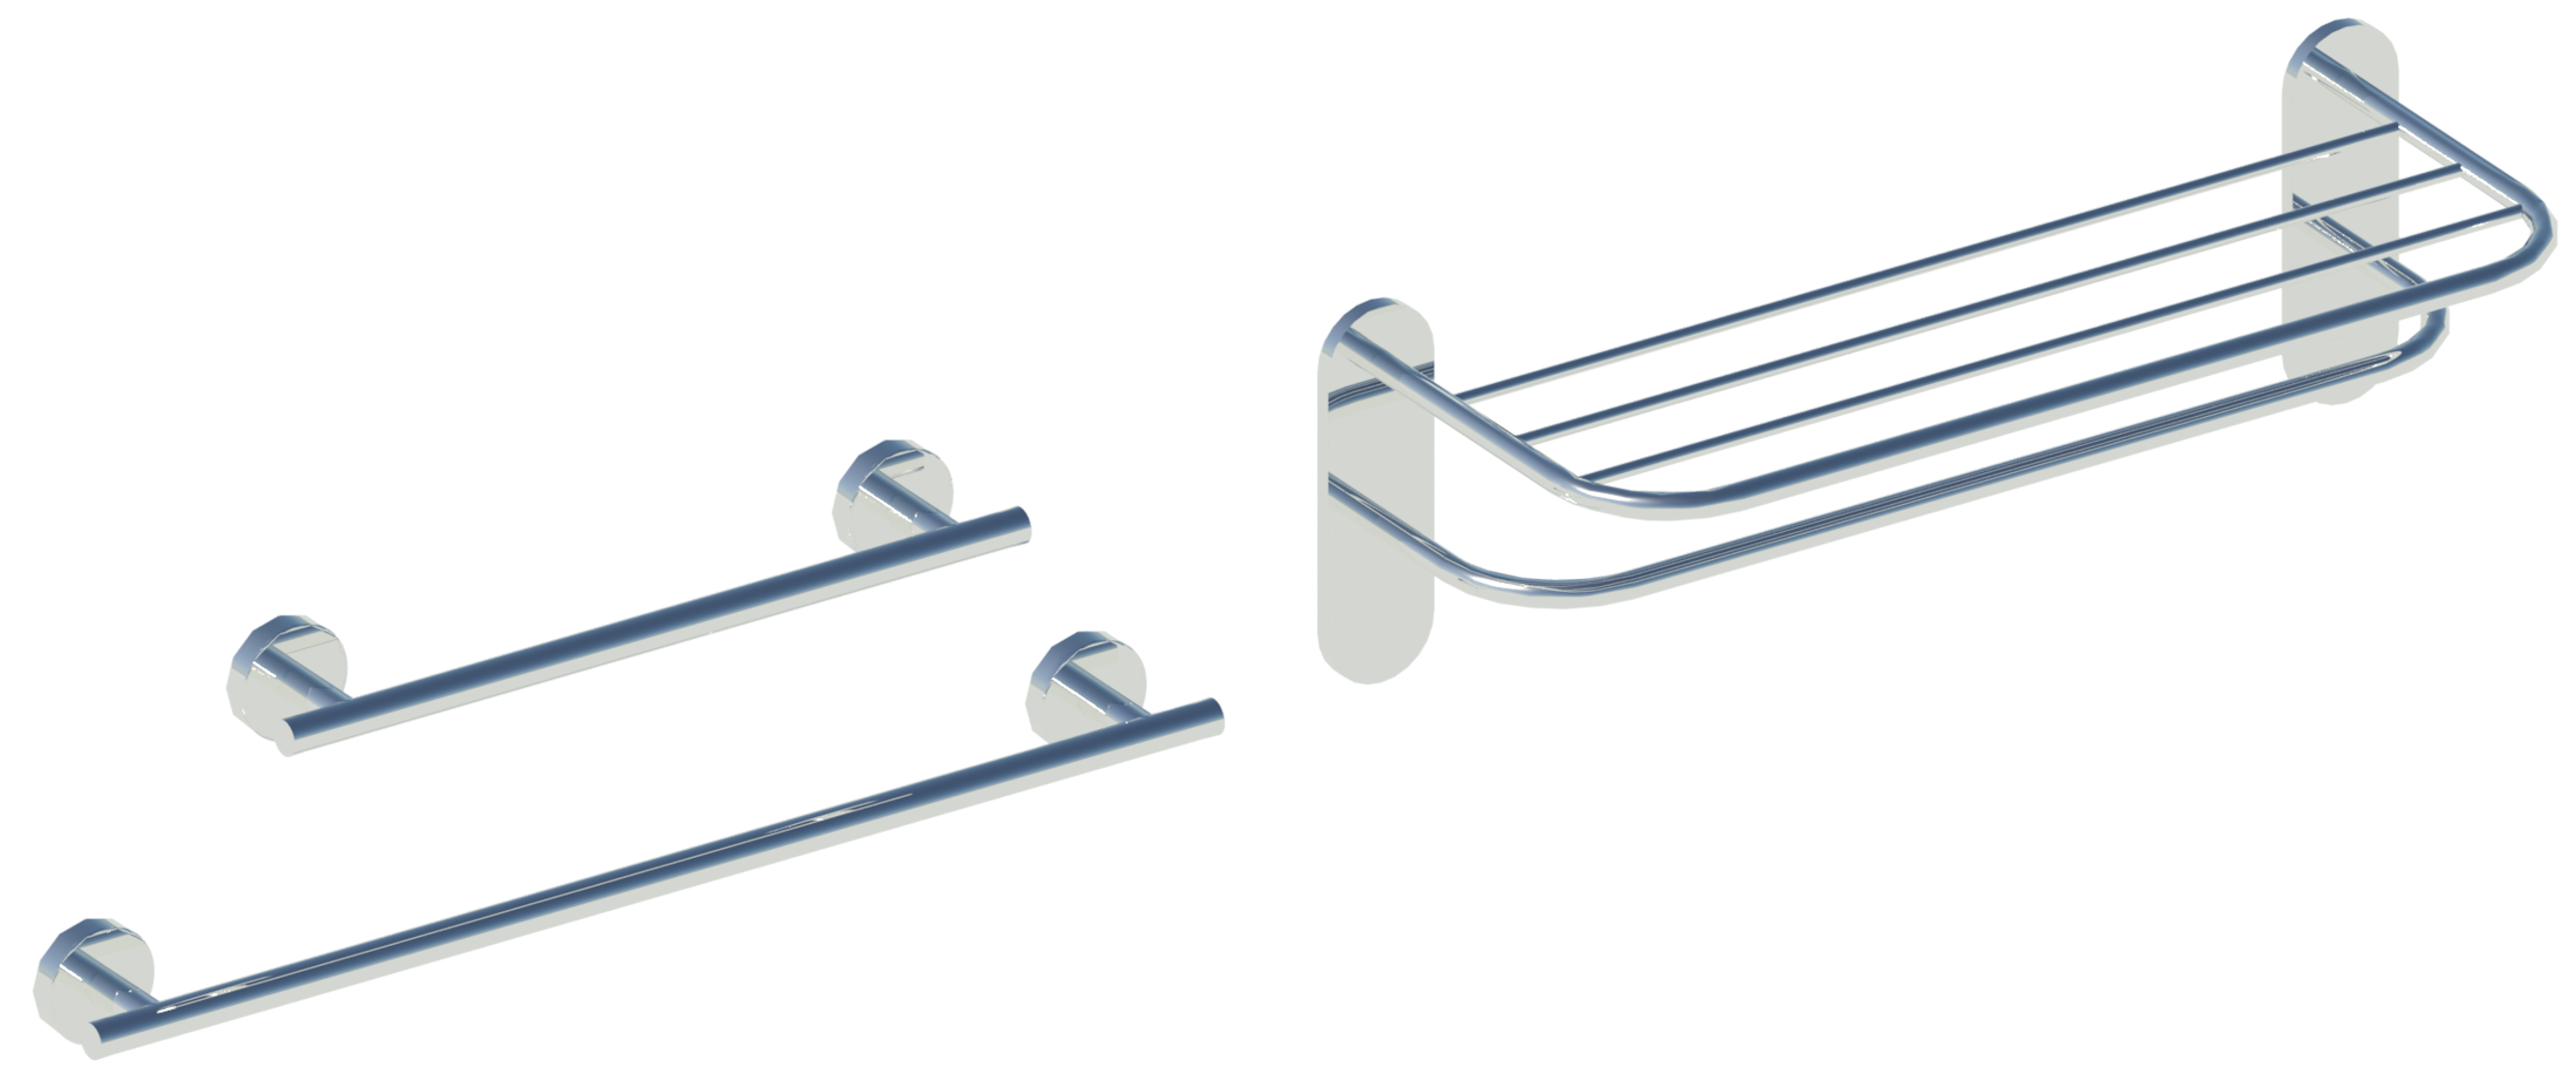 Revit ray-trace showing towel rails and towel rack.